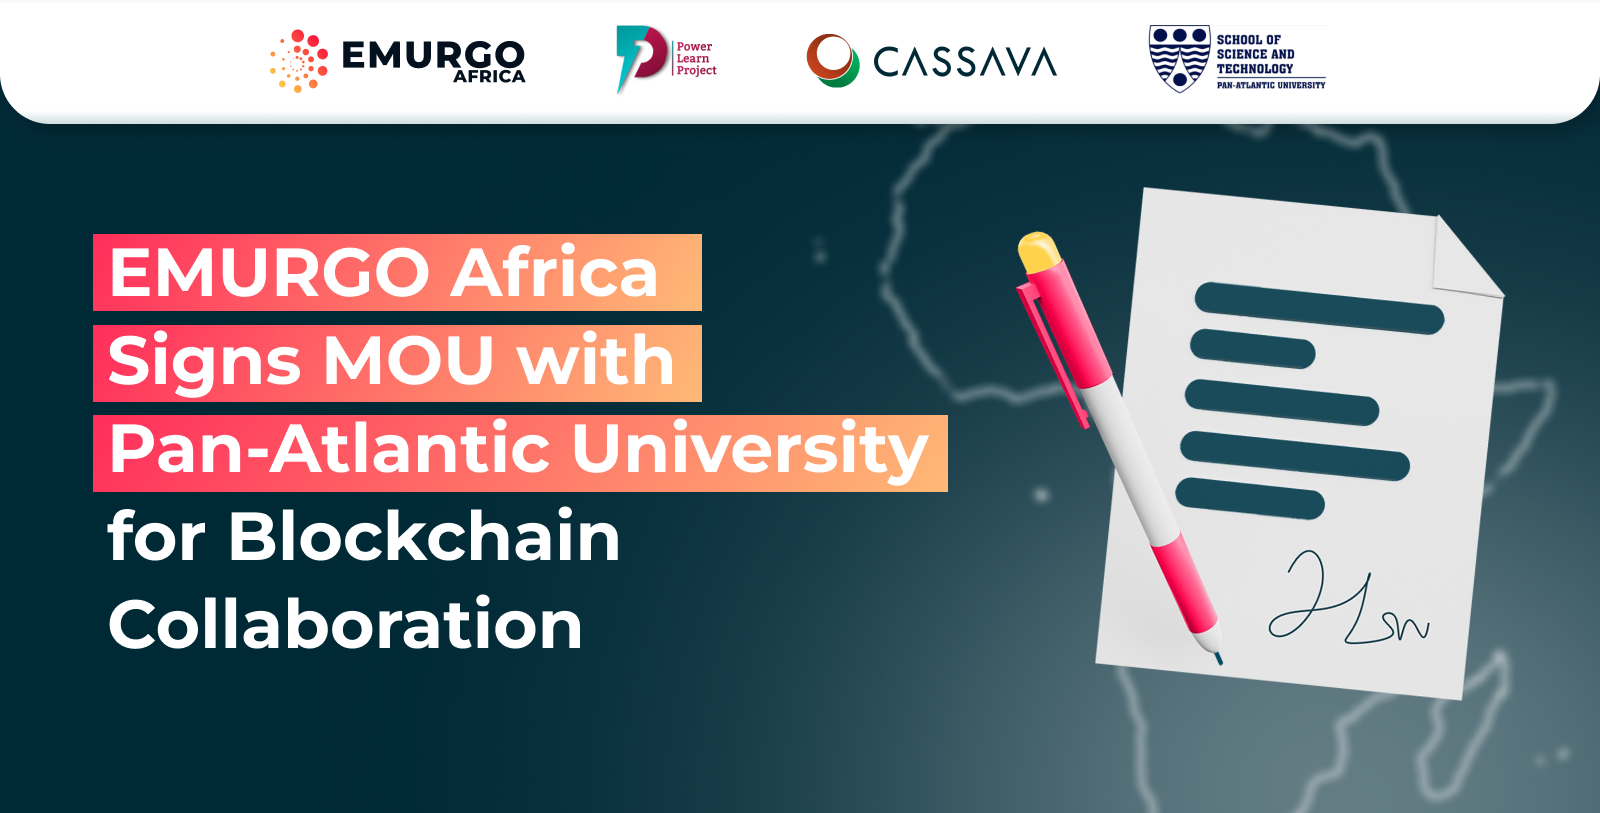 EMURGO-Africa-Signs-MOU-with-Pan-Atlantic-University-for-Blockchain-Collaboration.png